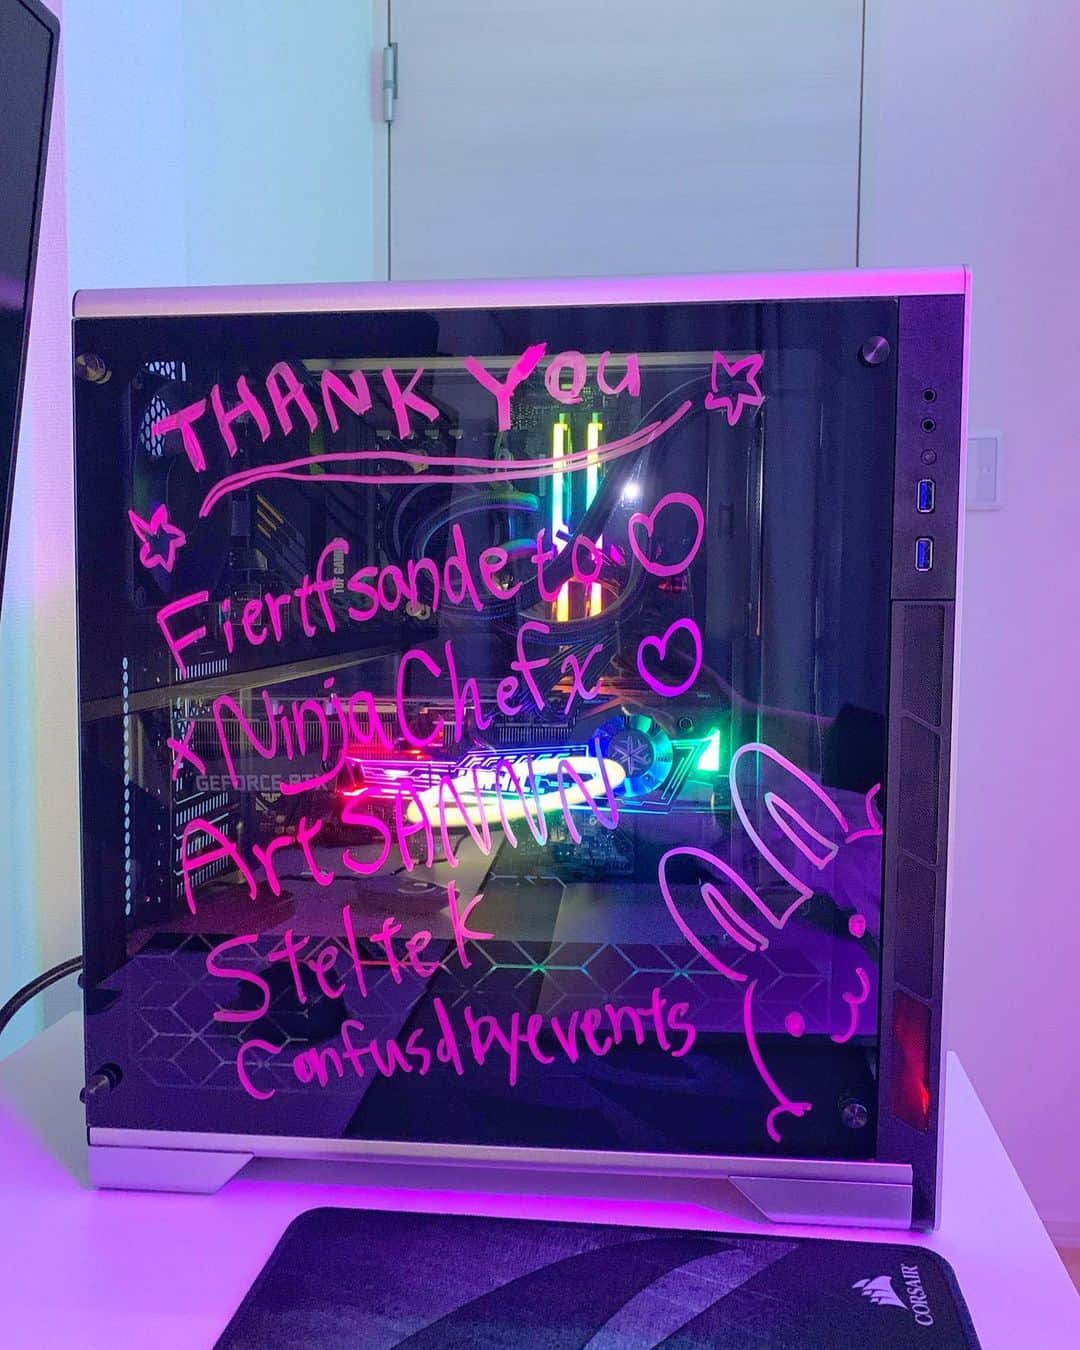 Rabiさんのインスタグラム写真 - (RabiInstagram)「New PC is an absolute BEAST🔥✨ Thank you all so much for the support you have given me, I never imagined this would be possible in 6 months!🙌🏻 I honestly don’t know how to express my gratitude in words because no matter how much I say thank you I still feel like it’s not good enough.🥺  I love you all!🐰💜💜💜 ︎┈︎┈︎┈︎┈︎┈︎┈︎┈︎┈︎┈︎┈︎┈︎ BIG shoutout to TOP 5 donors  ︎👑 Fiertfsandeto ✧ xNinjaChefx ✧ ArtSANNN ✧ steltek ✧ ConfusdByEvents ︎┈︎┈︎┈︎┈︎┈︎┈︎┈︎┈︎┈︎┈︎┈︎ SPECS  - CPU: Ryzen 7 5800X - GPU: RTX 3070 - ROM: 32GB(16GB*2) - SSD: 500GB - HDD: 4TB - PSU: 750W 80PLUS GOLD ⁡ #twitchstreamer #twitchgirls #girlgamer #gamergirl #girlstreamer #japanesegirl #japanesecosplayer #ゲーマー女子 #ゲーム女子 #ゲーミングpc」10月23日 23時51分 - cosmicrabbit